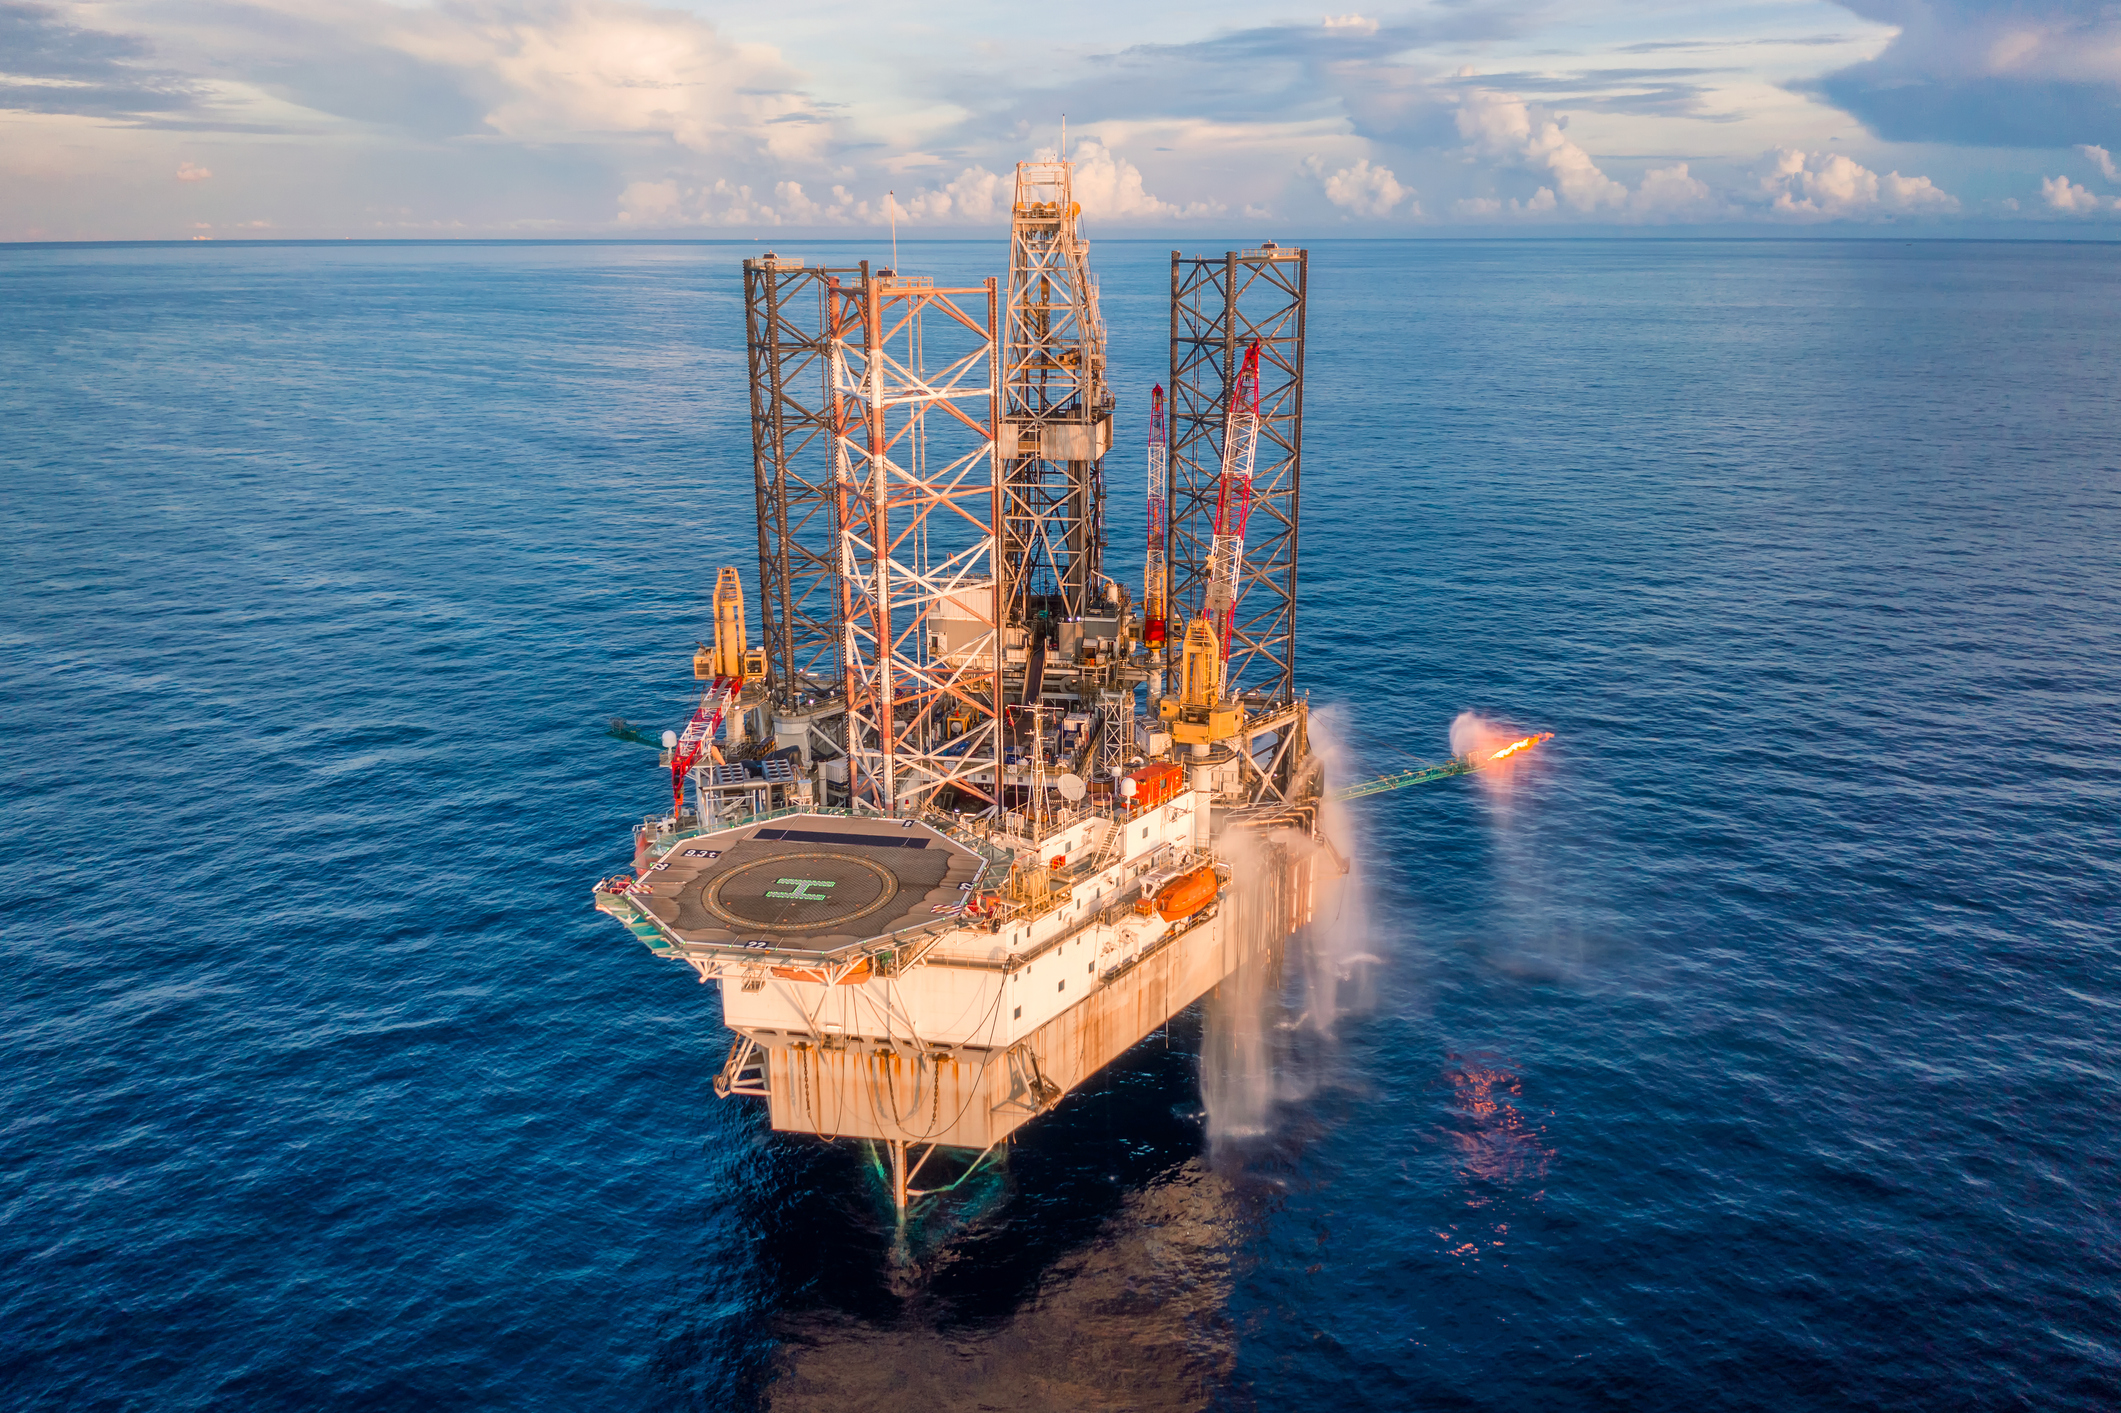 Oil and Gas Exploration Drilling Rig in the middle of the ocean